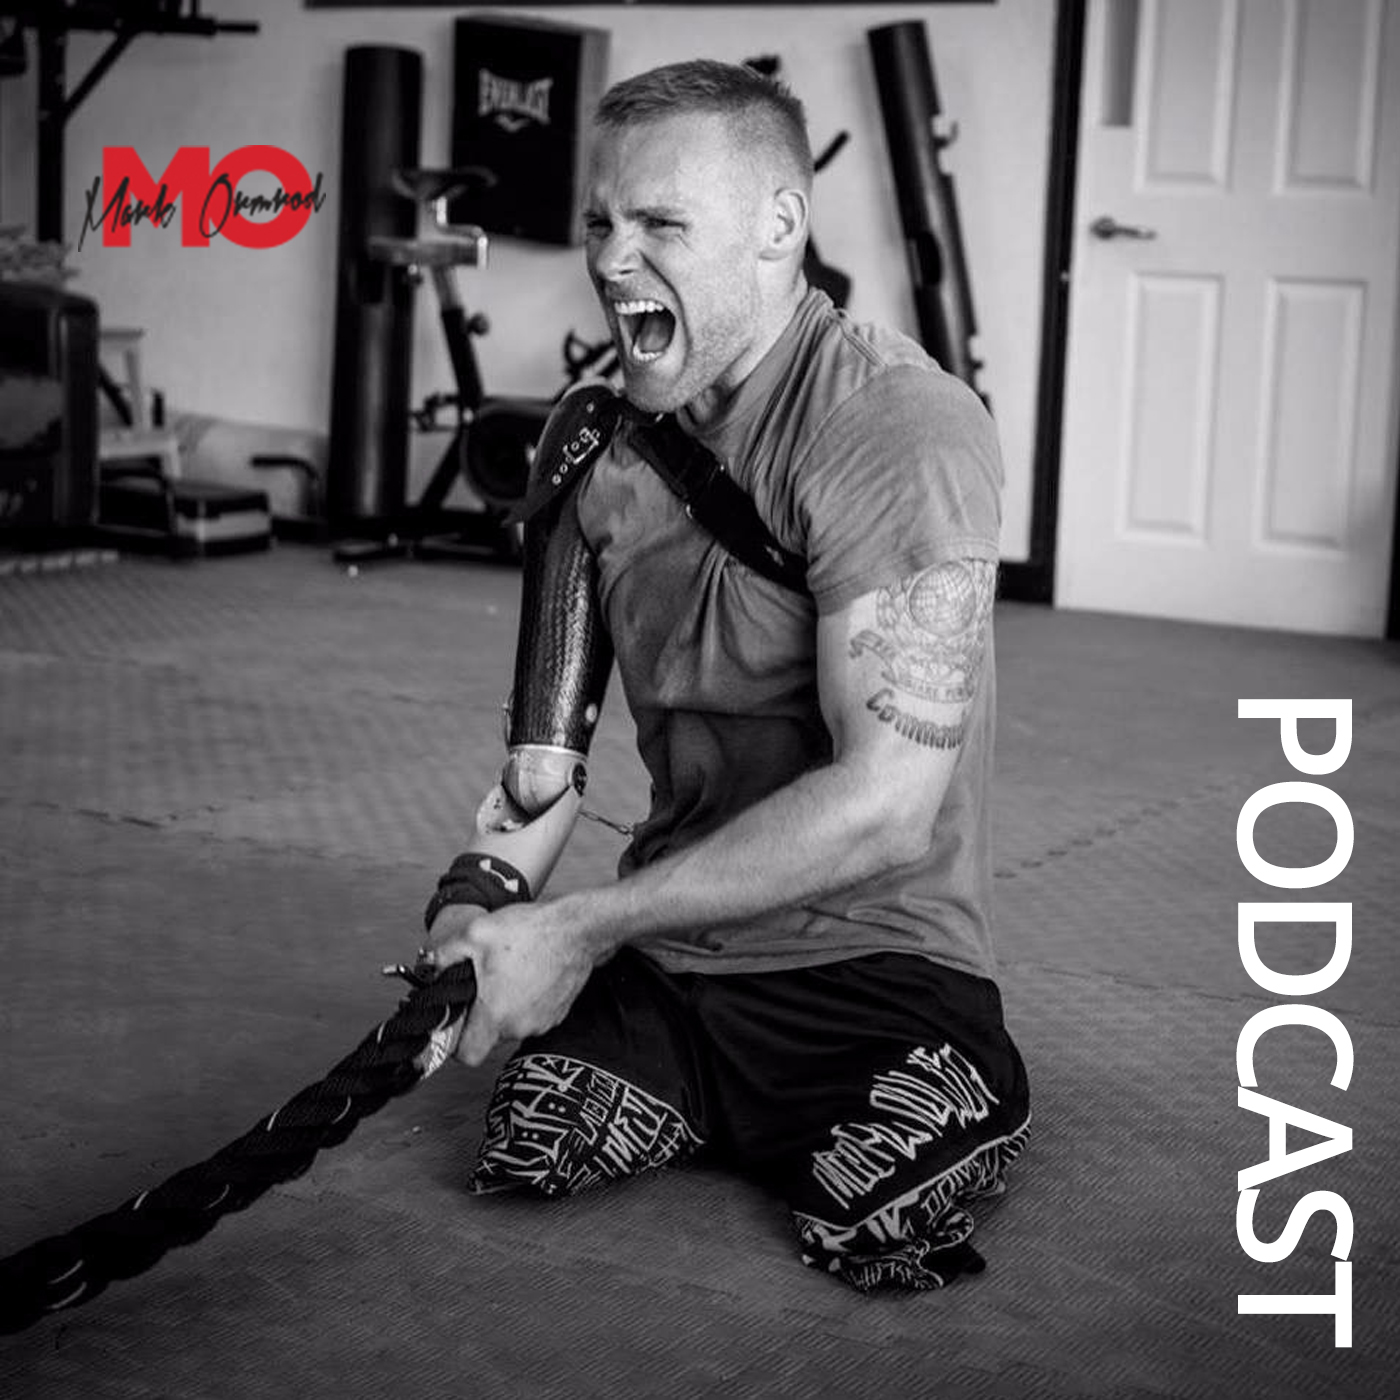 Episode 003 - Hitting the Wall